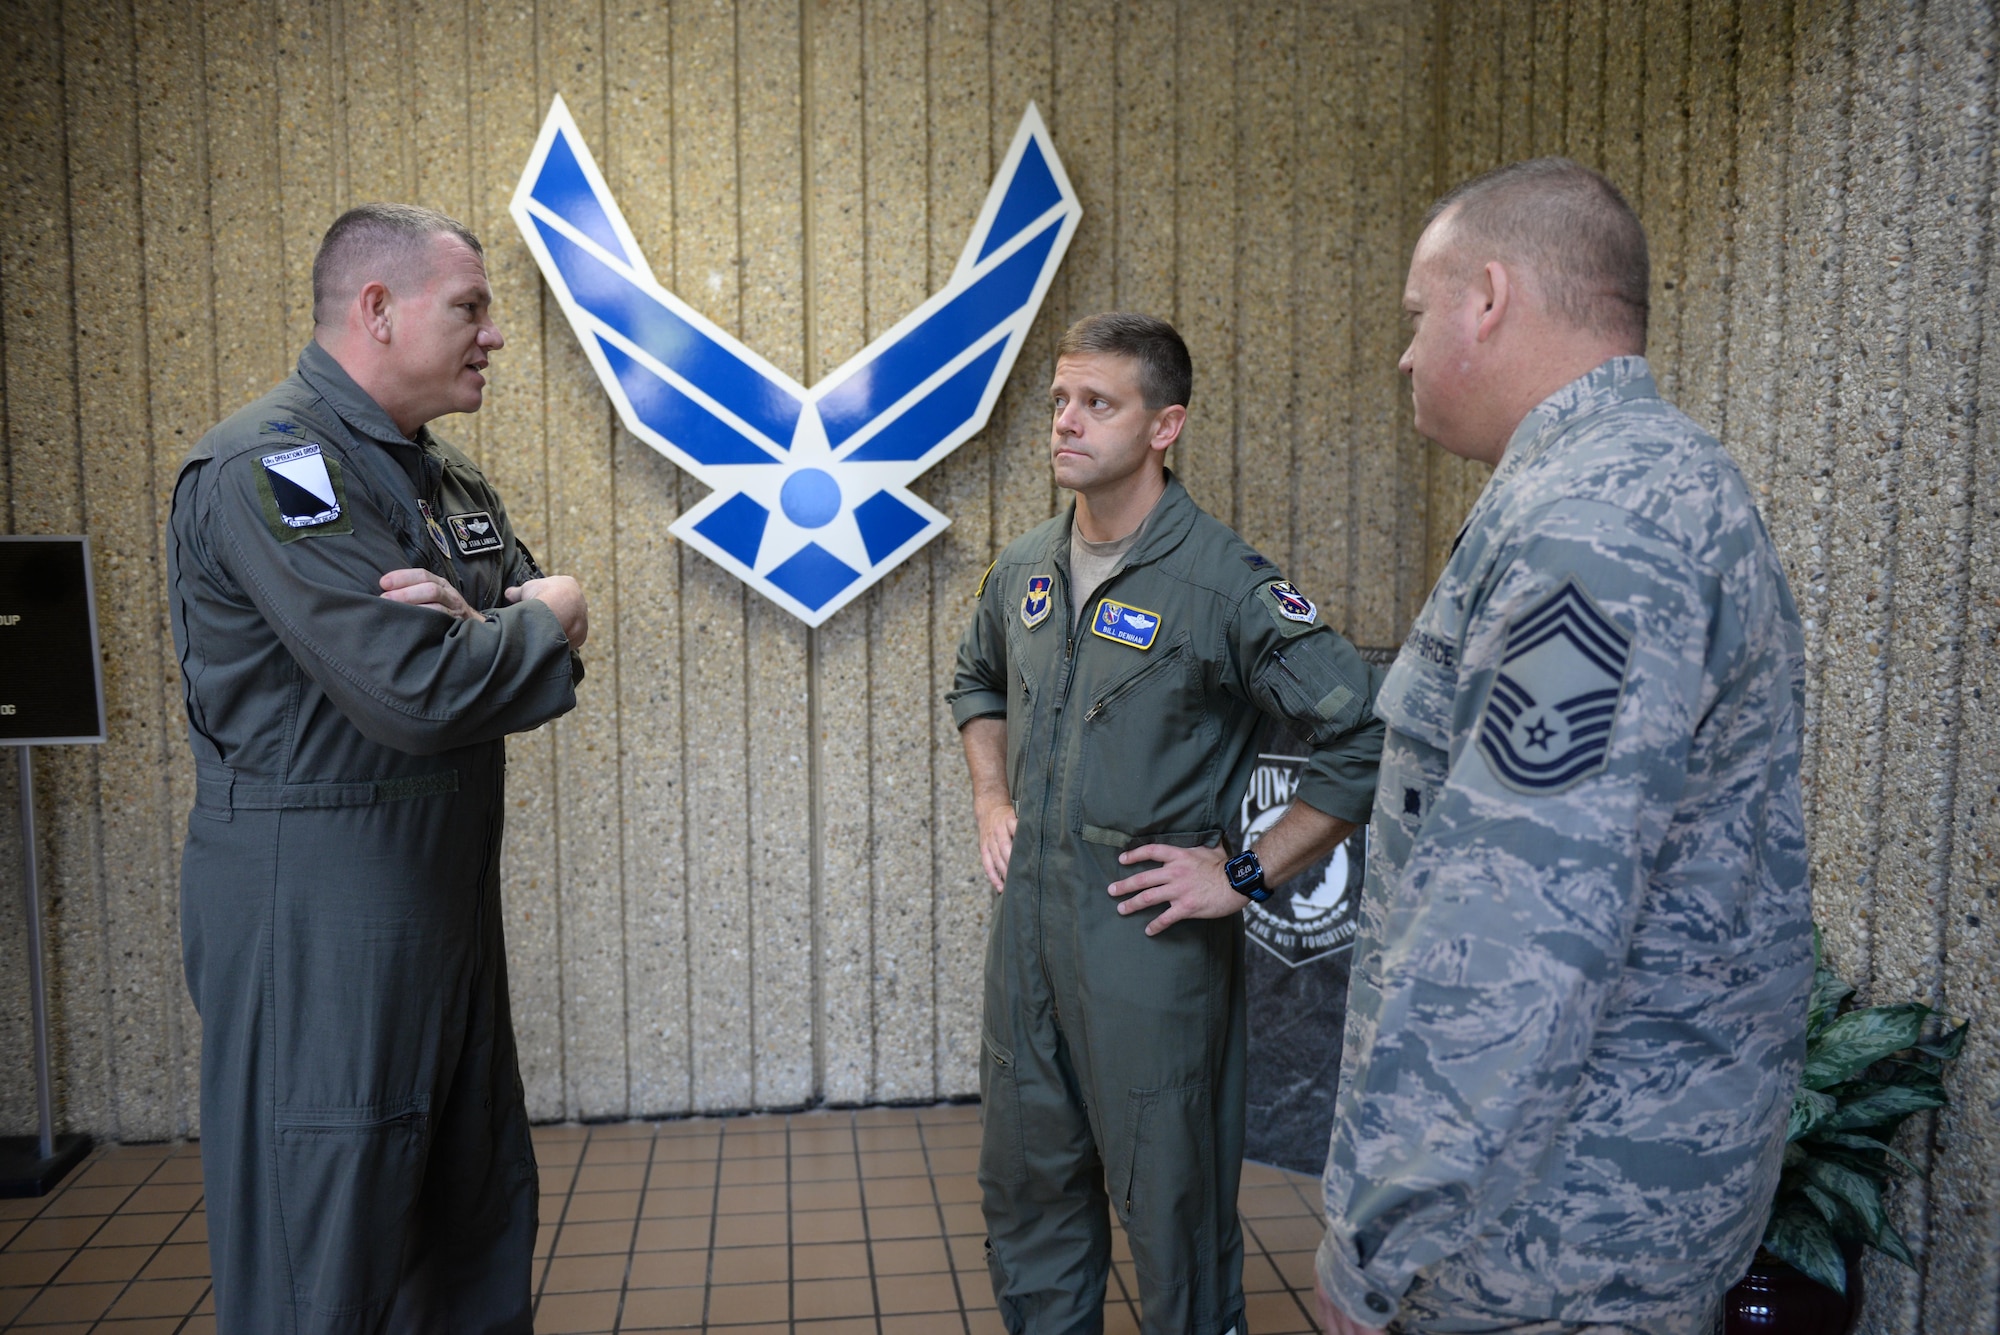 Col. William Denham, 14th Flying Training Wing Vice Commander, meets with Col. Stan Lawrie, 14th Operations Group Commander, and Chief Master Sgt. Bradley Reilly, 14th Operations Group Superintendent, for an immersion on July 11, 2017 at Columbus Air Force Base, Mississippi. Immersions are designed to let new commanders assess the unit and any problems, if any, associated with it. Immersions allow face to face conversation with the new commander.